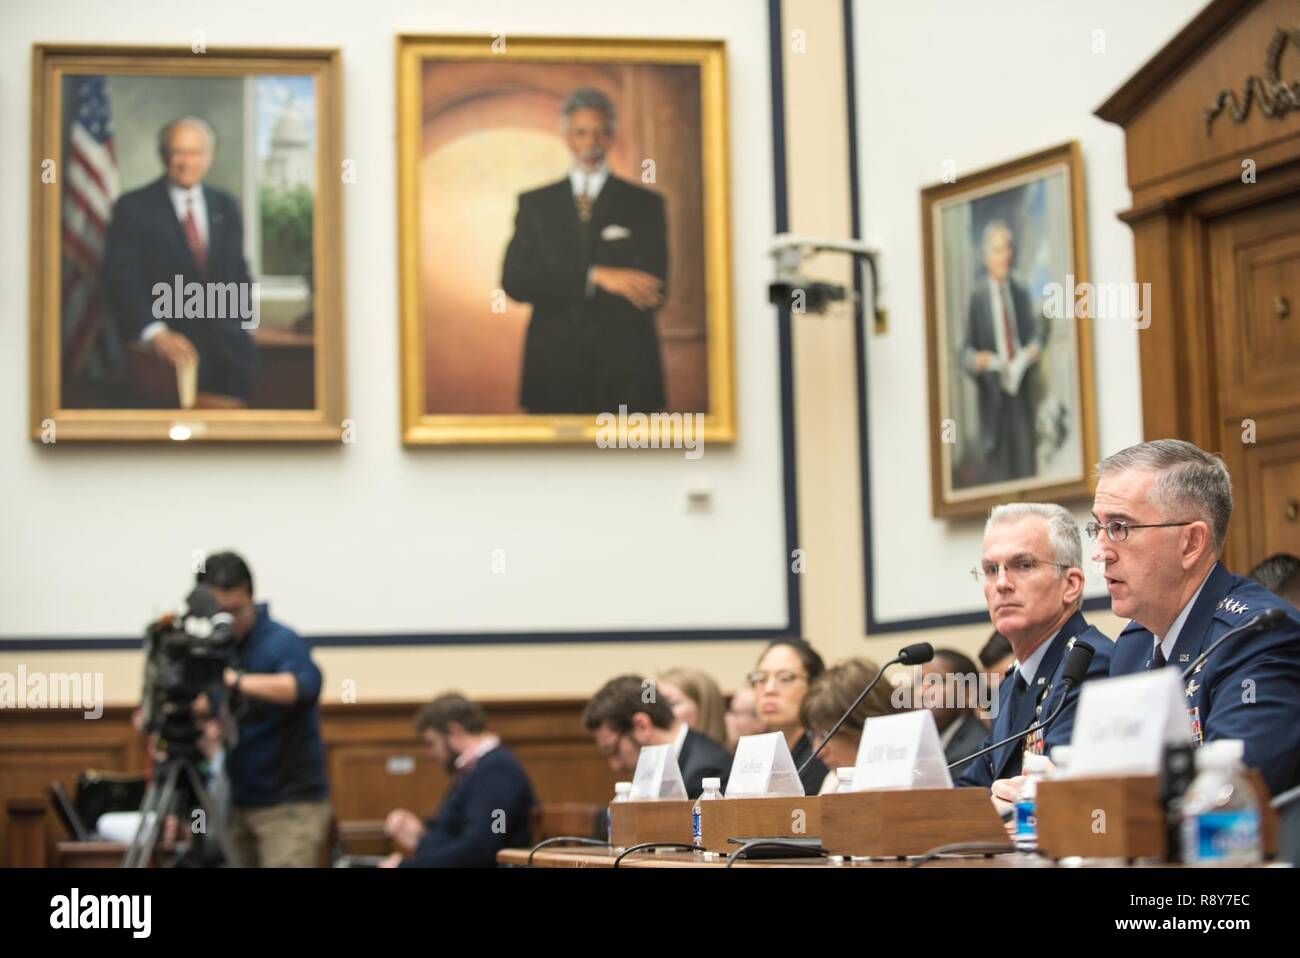 U.S. Air Force Gen. Paul J. Selva, Vice Chairman of the Joint Chiefs of Staff, testifies during a House Armed Services Committee hearing on Capitol Hill, March 7, 2017. Gen Selva testified alongside U.S. Air Force Gen. John E. Hyten, commander of U.S. Strategic Command; U.S. Navy Adm. Bill Moran, Vice Chief of Naval Operations; and U.S. Air Force Vice Chief of Staff Gen. Stephen Wilson. Gen. Selva spoke about the continuing relevance of U.S. nuclear forces for our national security and the steps the Joint Force is taking to modernize and replace them. He also stated that U.S. weapons, delivery Stock Photo